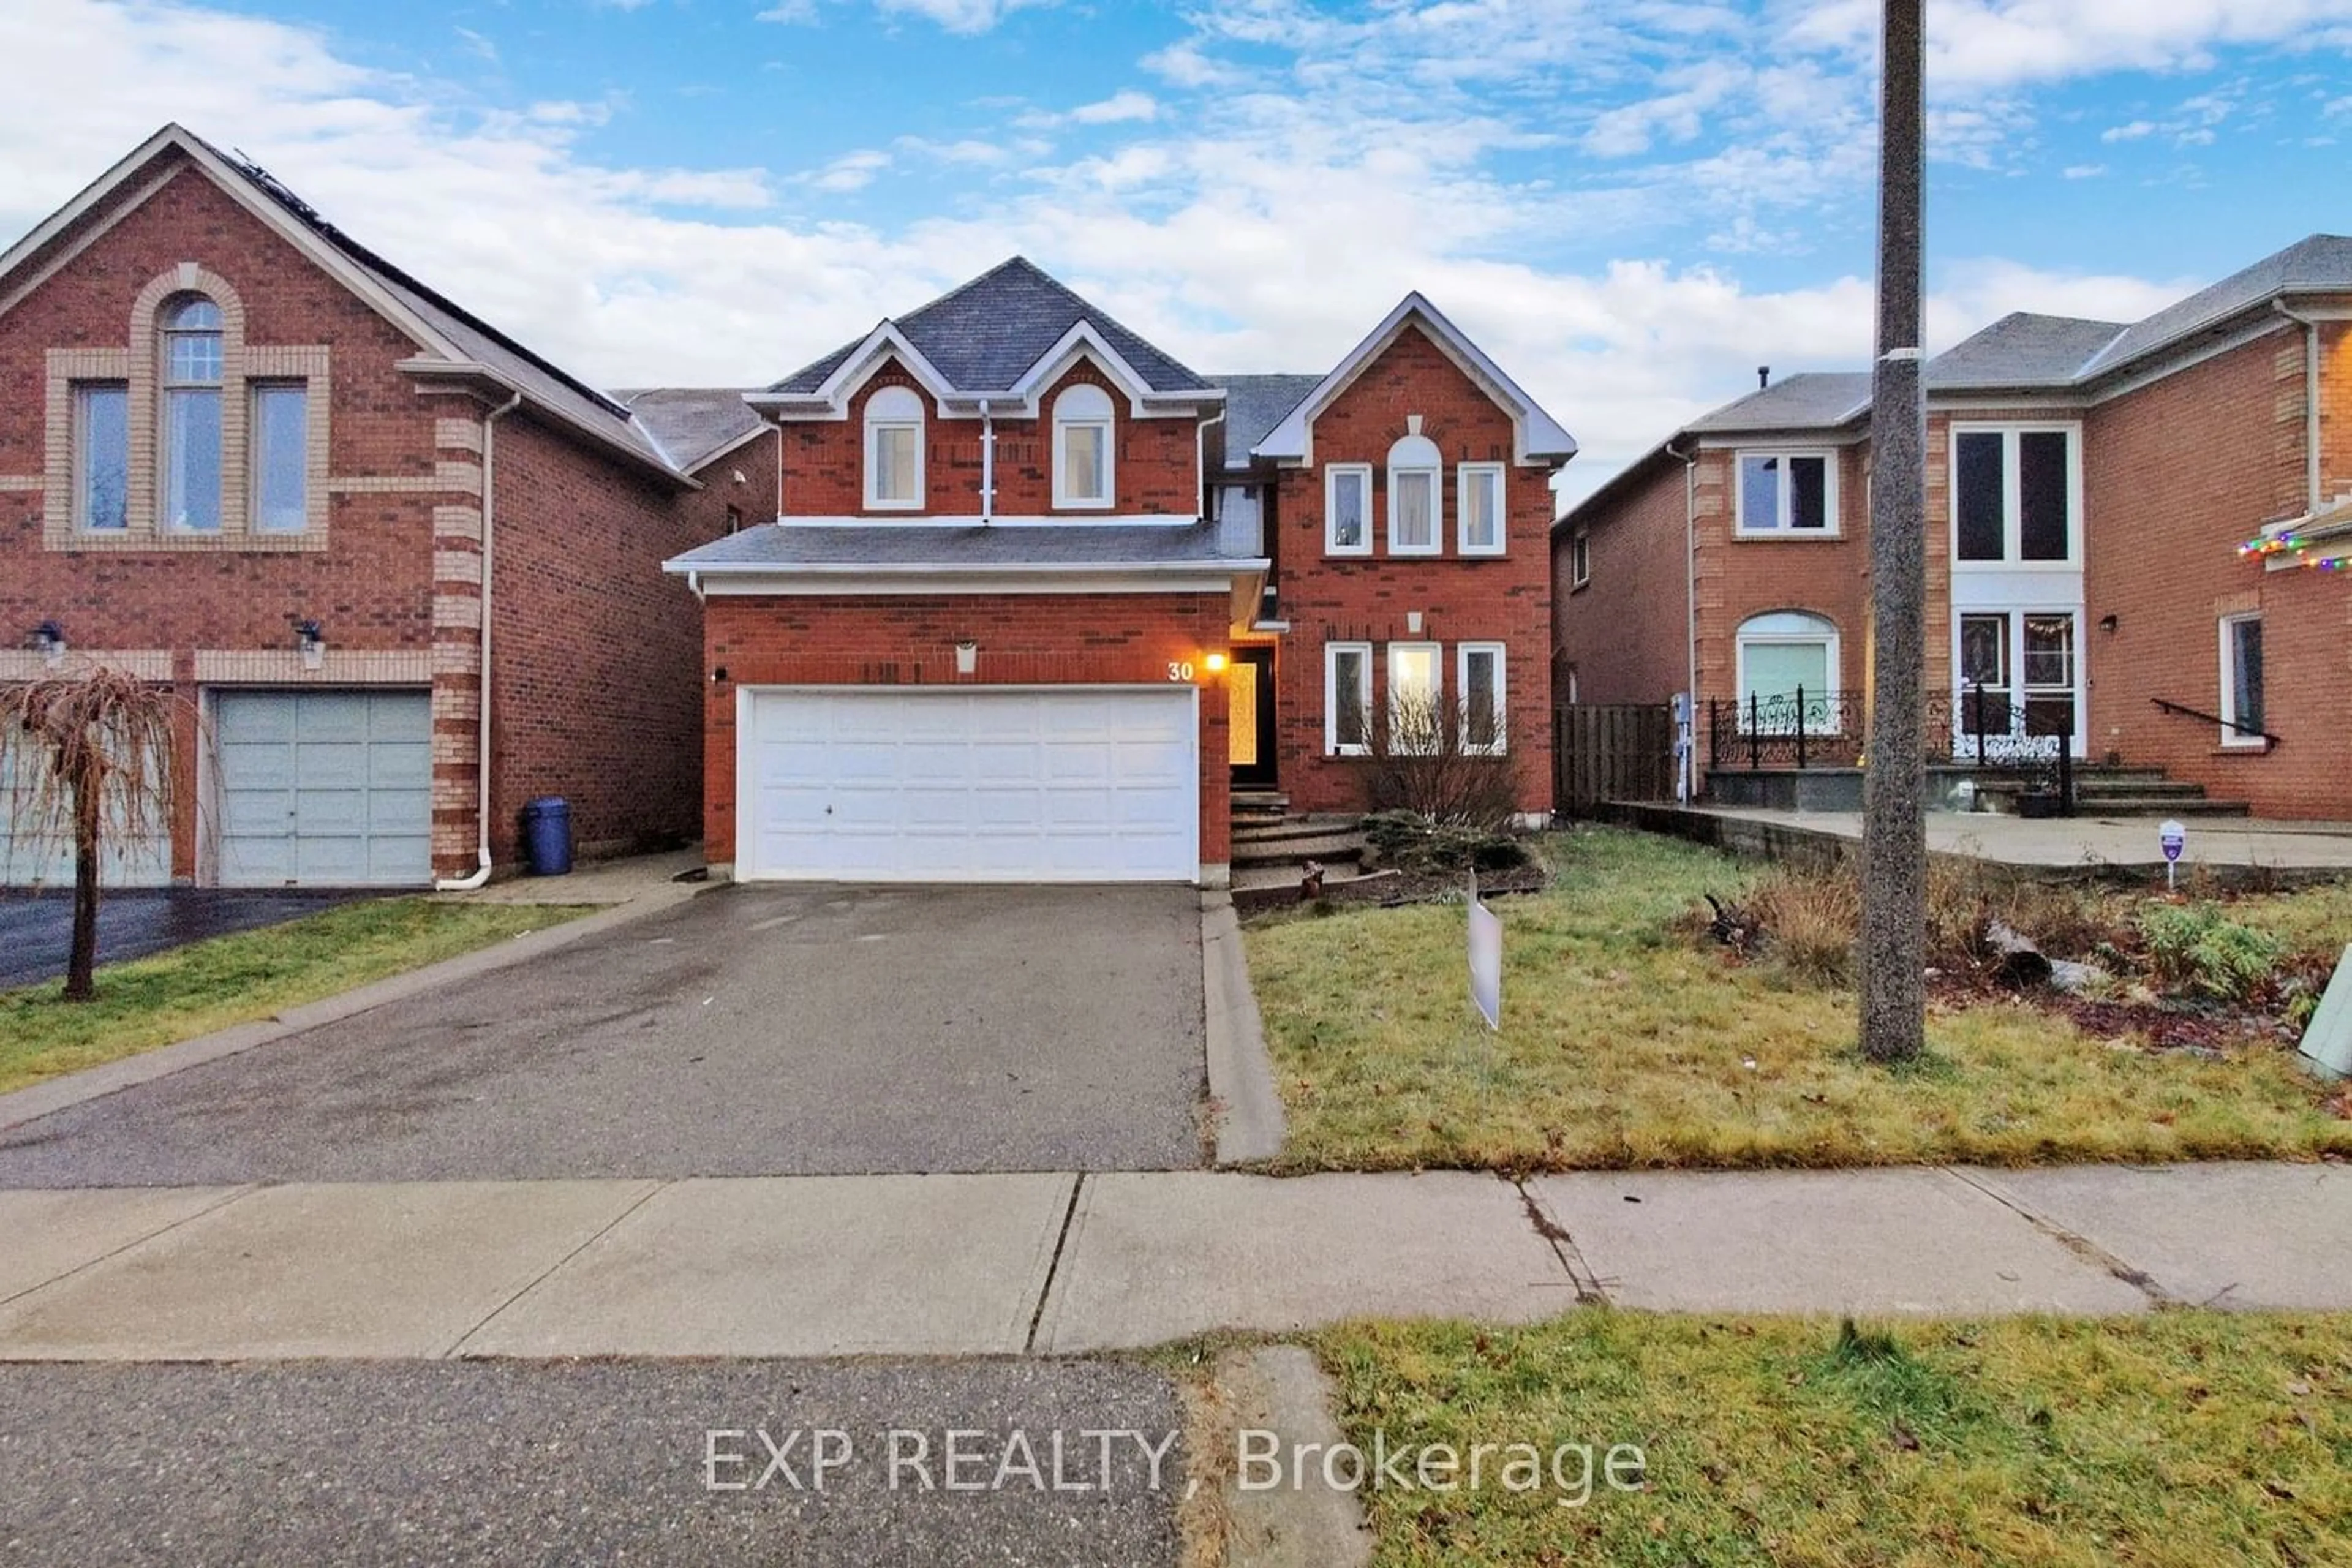 Frontside or backside of a home for 30 Adirondack Cres, Brampton Ontario L6R 1E5